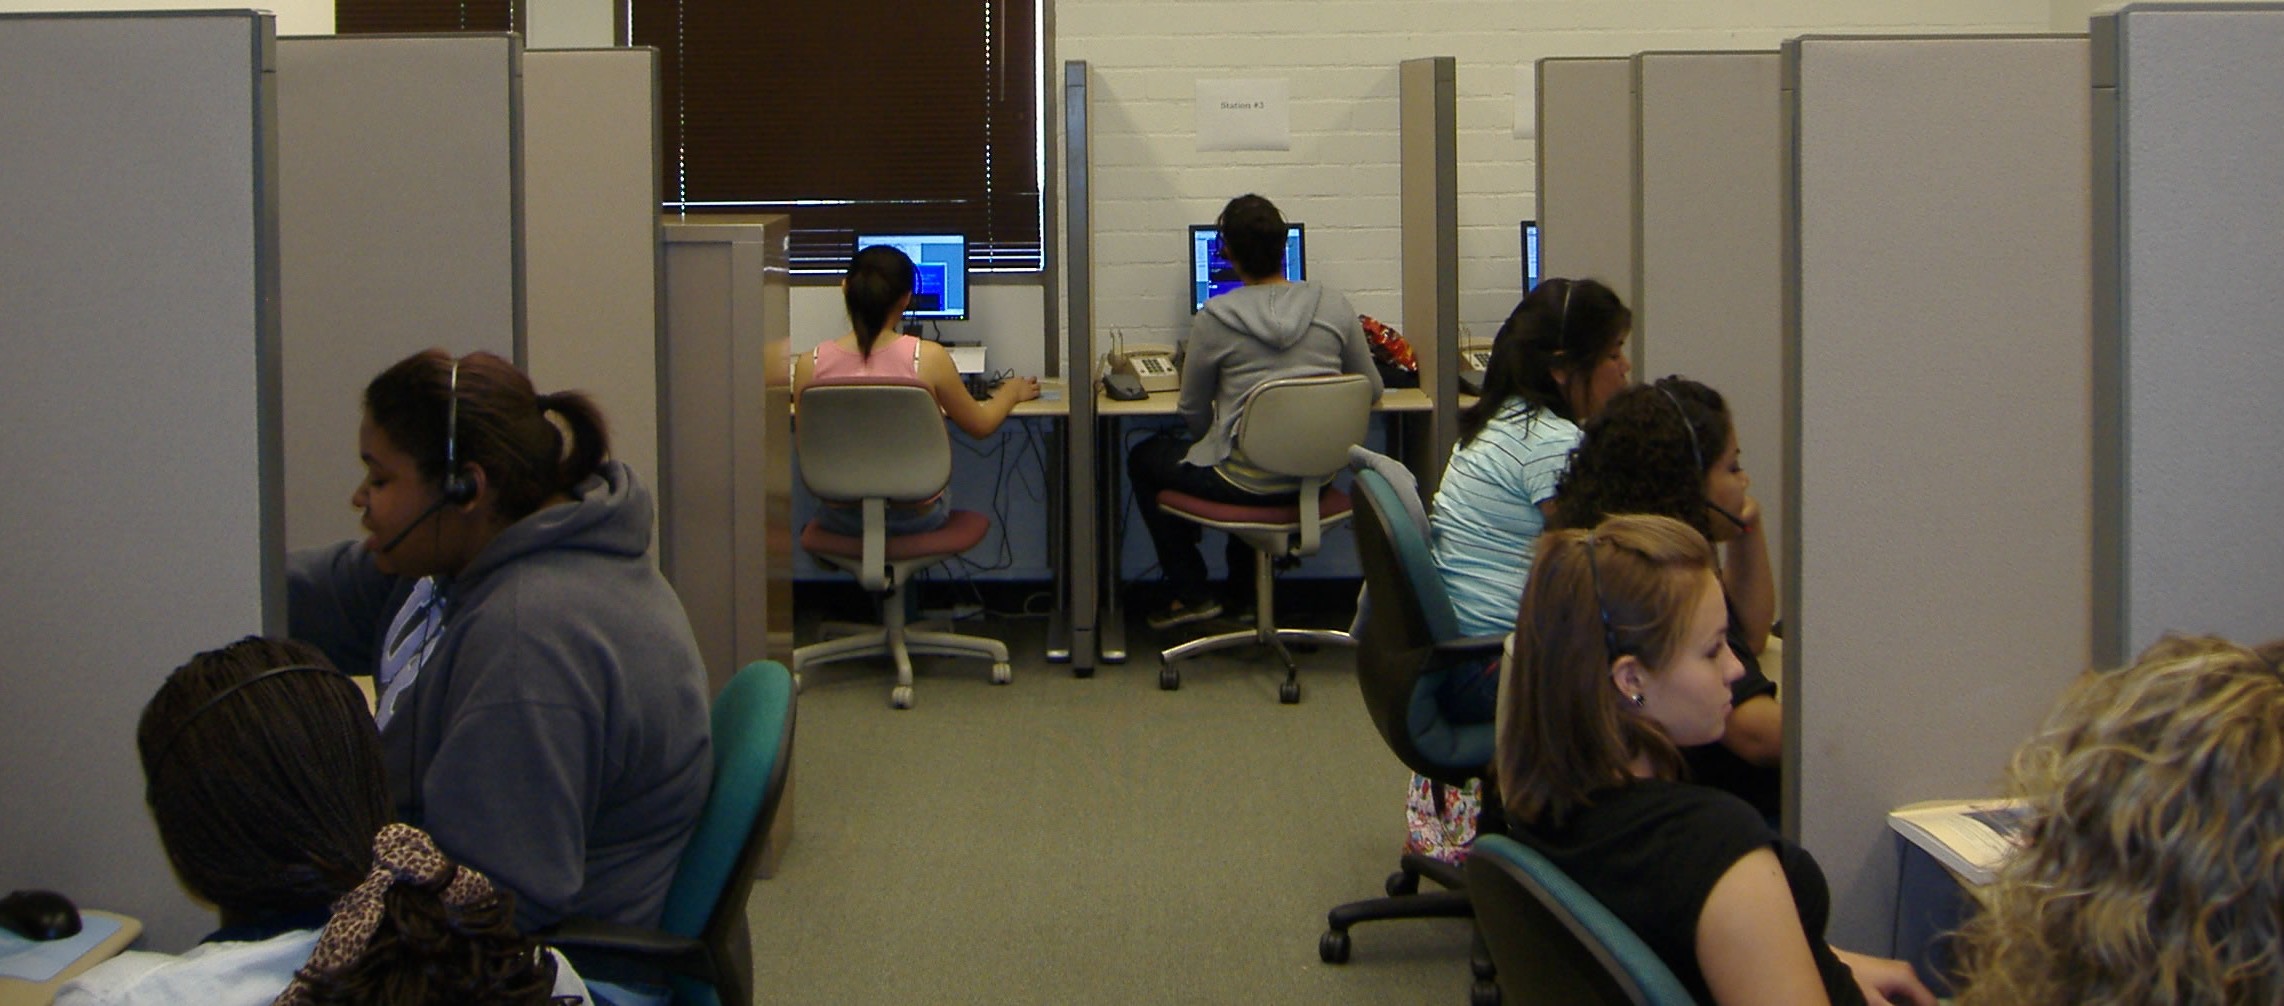 Interviewers work on a telephone survey in the 16-station CATI laboratory at the UCR SRC.